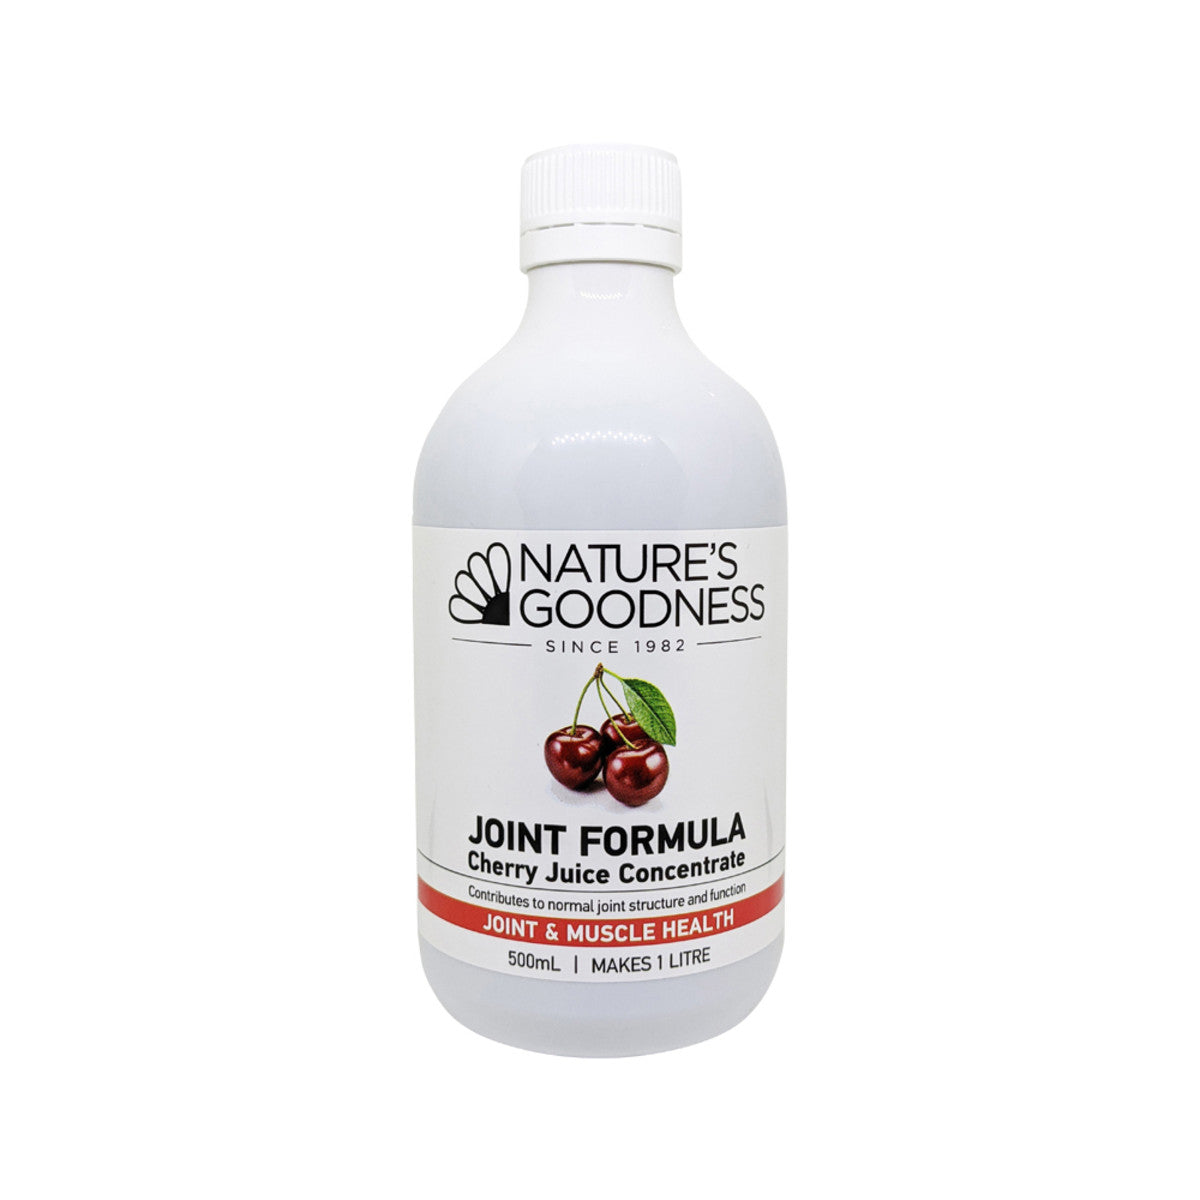 Nat Goodness Joint Formula Cherry Juice Concentrate 500ml